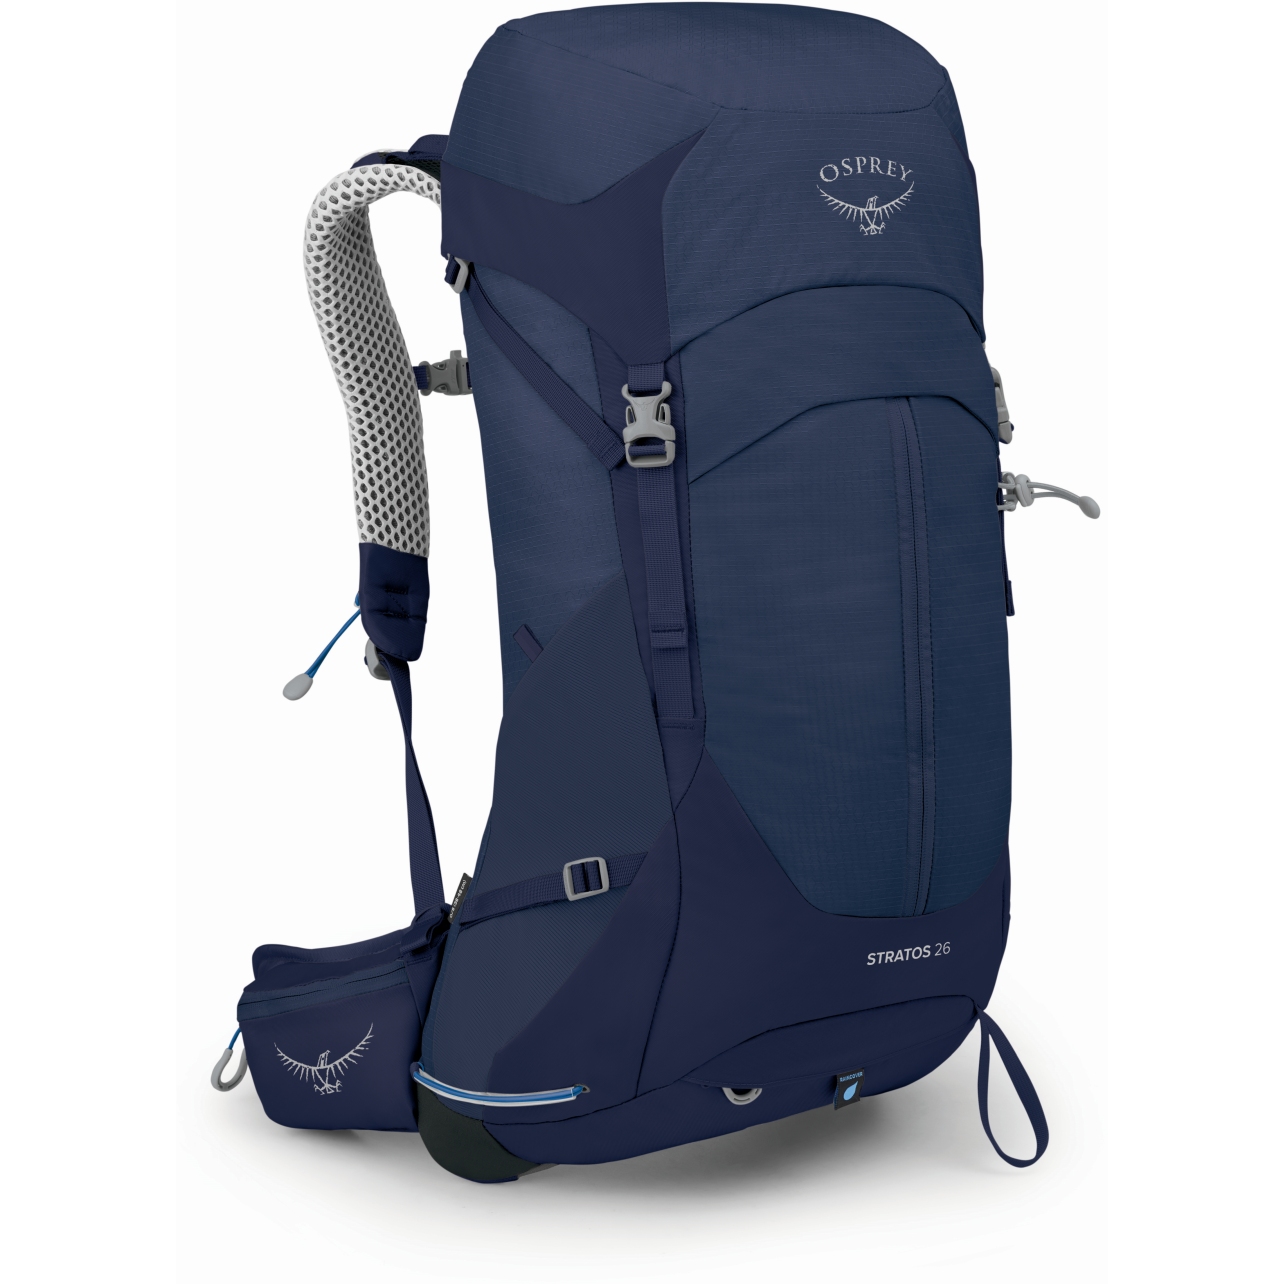 Picture of Osprey Stratos 26 Backpack - Cetacean Blue